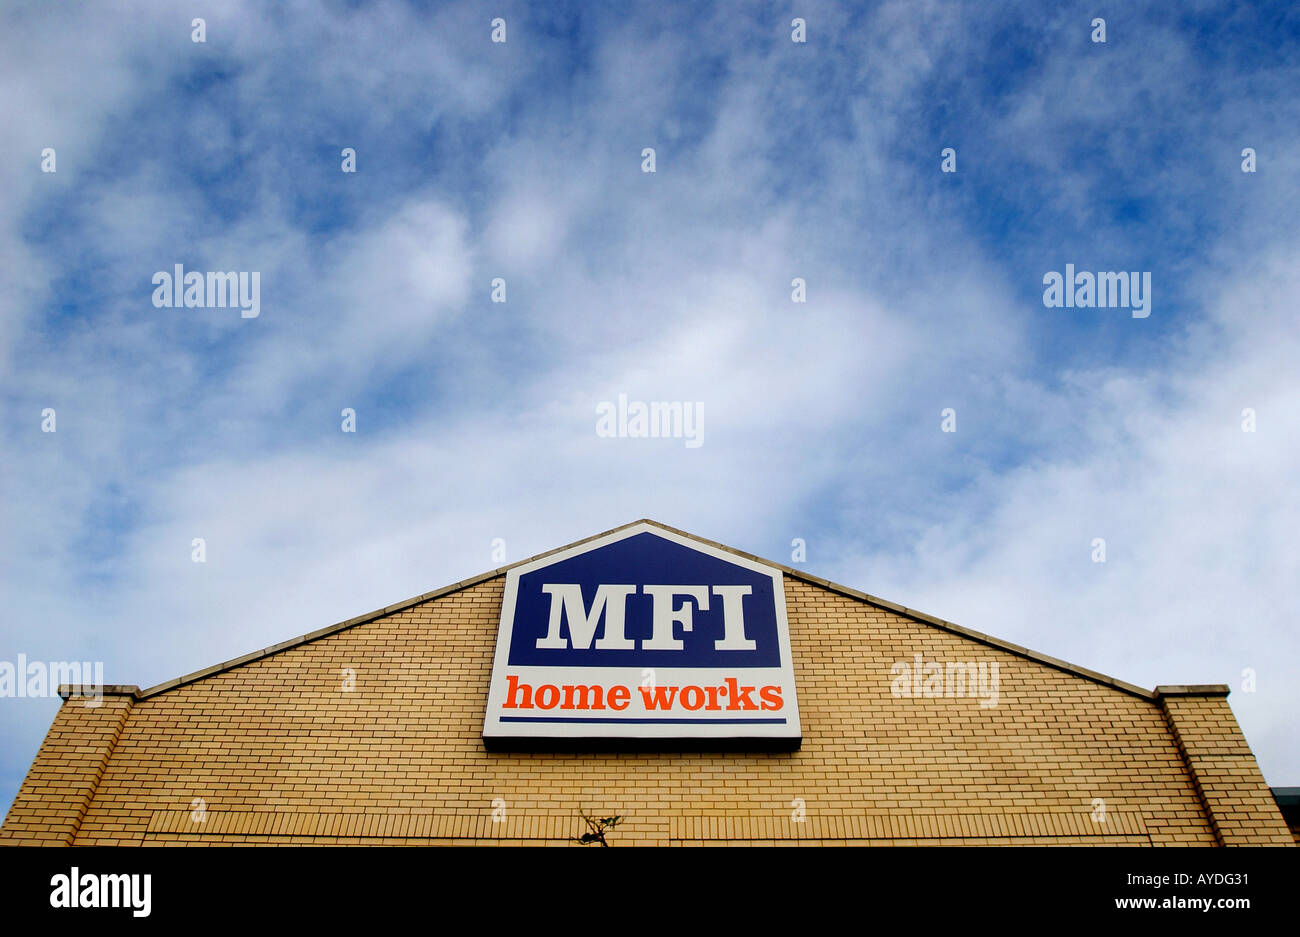 The MFI logo on the side of the building in Barnstaple, North Devon. Stock Photo